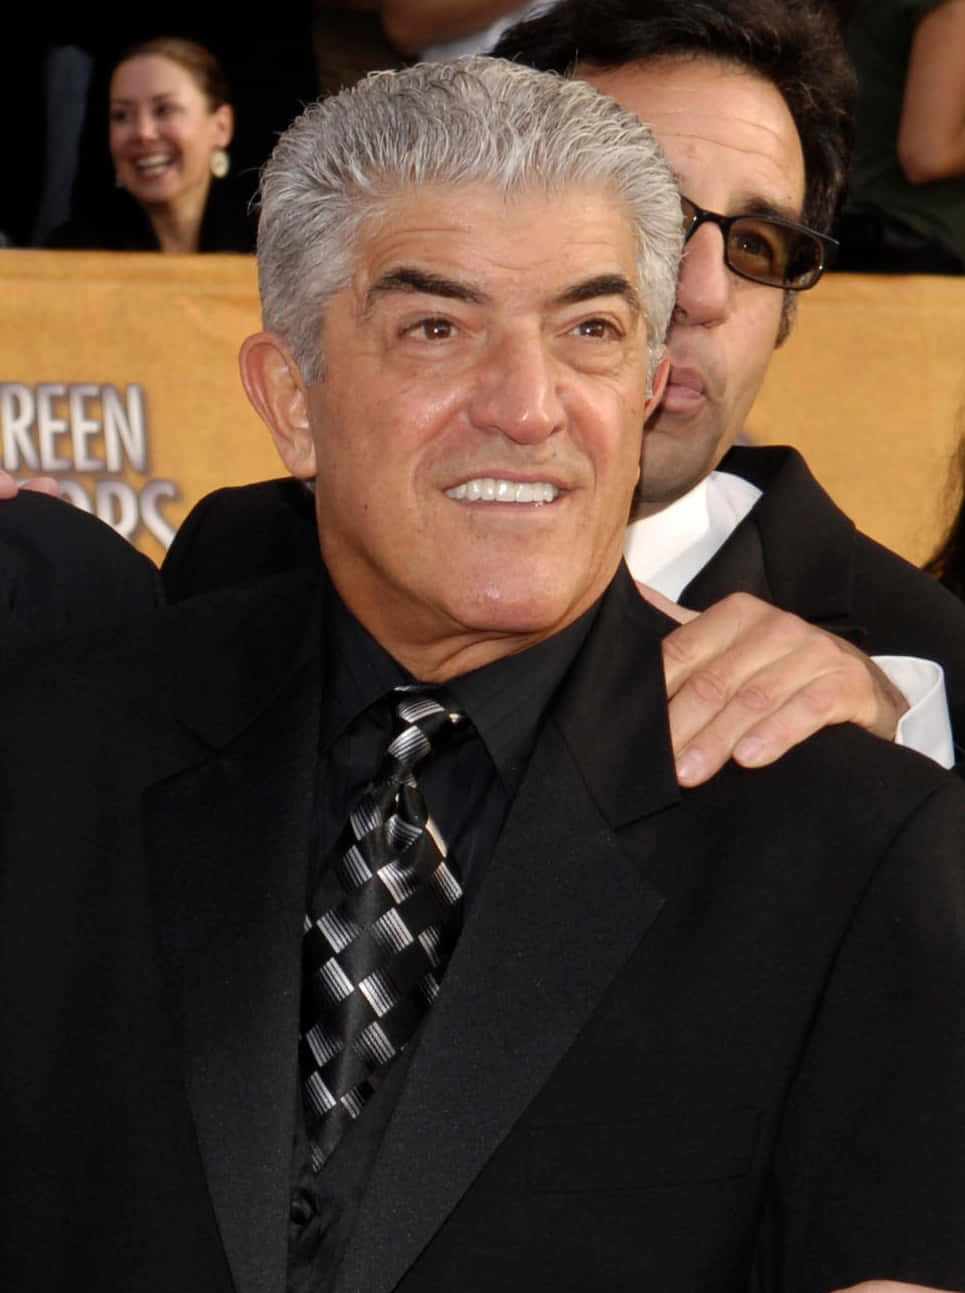 Frankvincent Is A Renowned Actor Known For His Roles In Movies Like Goodfellas And The Sopranos. He Is Often Praised For His Powerful And Convincing Performances. His Presence On Computer Or Mobile Wallpapers Would Definitely Add A Touch Of Sophistication And Hollywood Glamour To Your Device. Fondo de pantalla